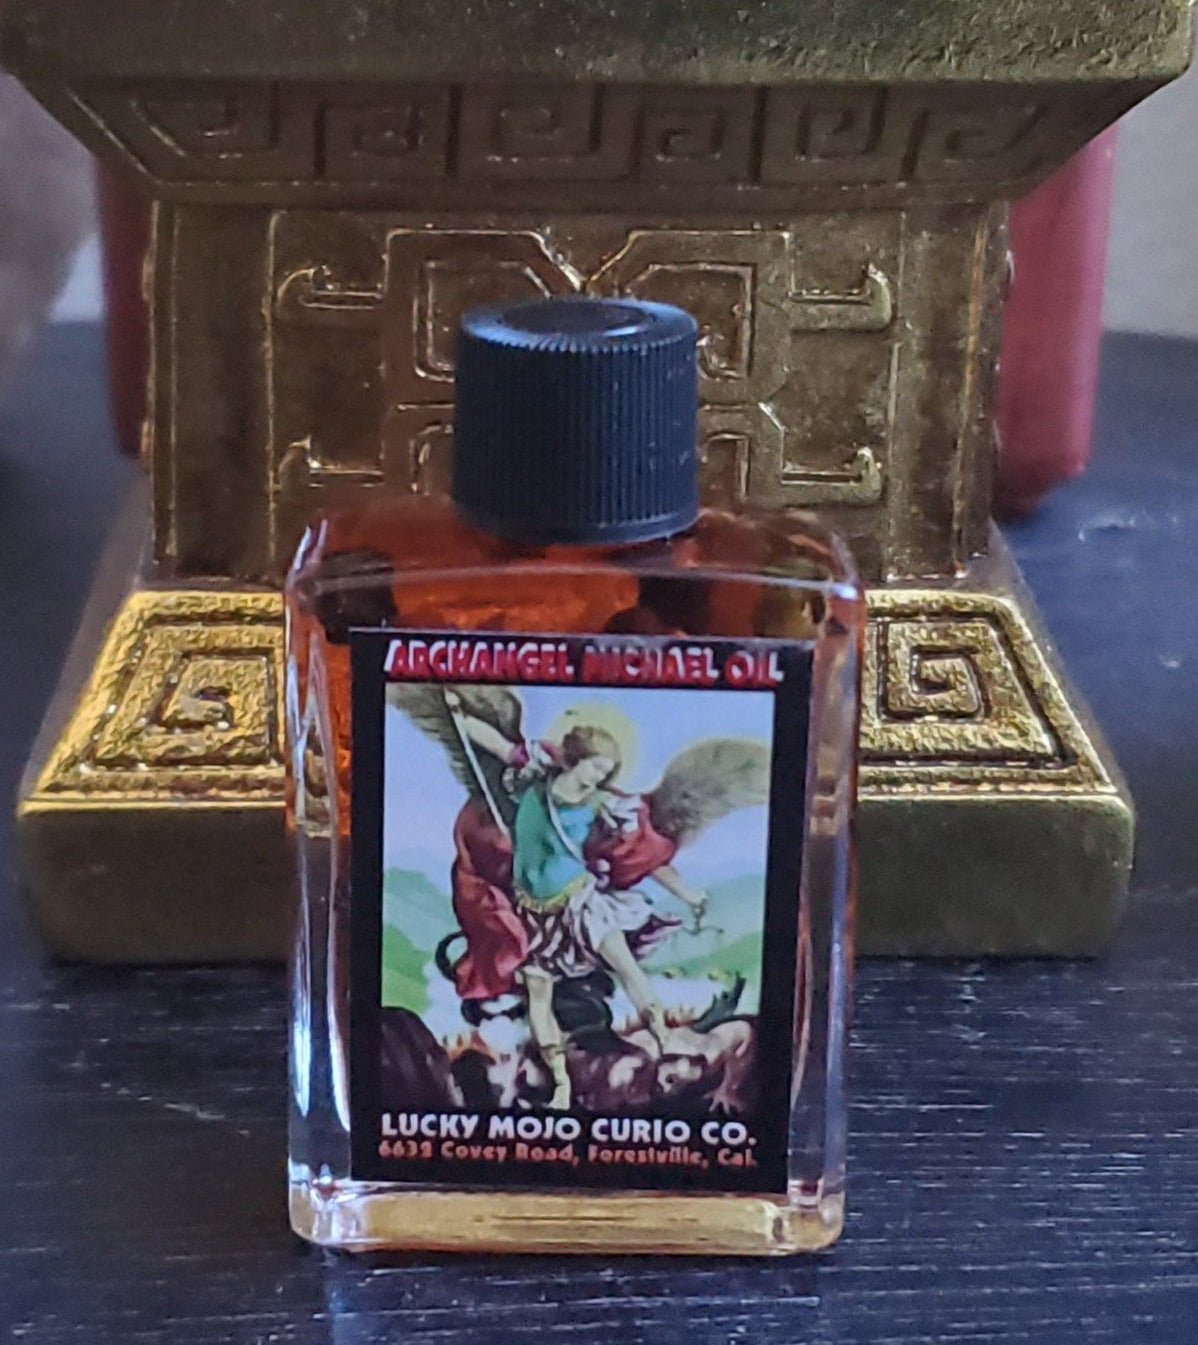 #LuckyMojoCurioCo Archangel Michael Anointing / Conjure Oil #Great Deal #LuckyMojoCurioCo #LuckyMojo #EffectiveOils #MustHave